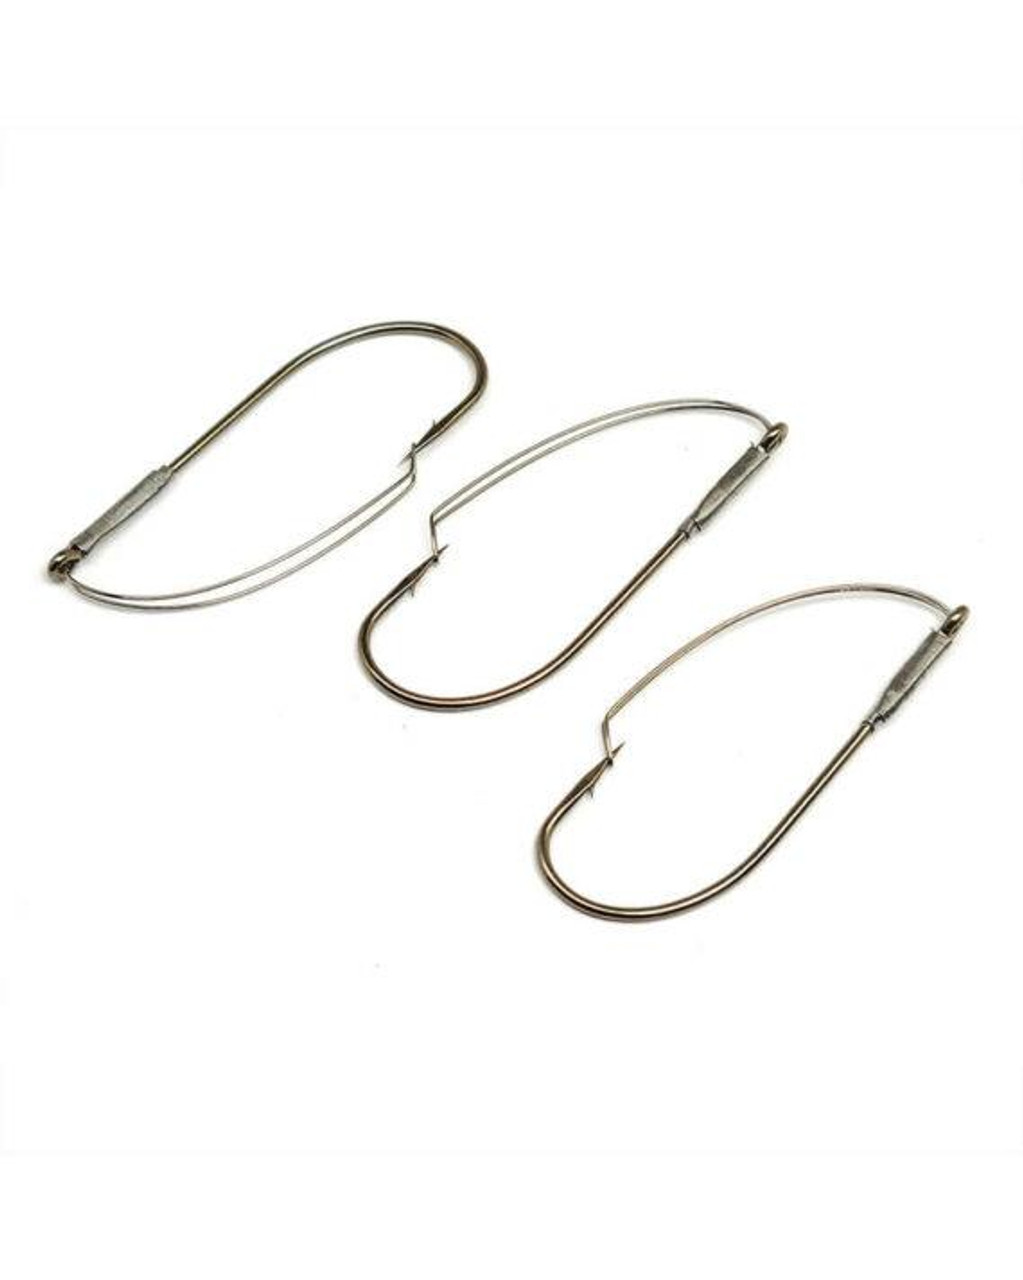 https://cdn11.bigcommerce.com/s-0xmhwue6/images/stencil/1280x1280/products/13926/65988/Gamakatsu-Worm-Straight-Shank-Hook-with-Wire-Guard-Bronze-4-Pack-089726038023_image1__66517.1684245417.jpg?c=2